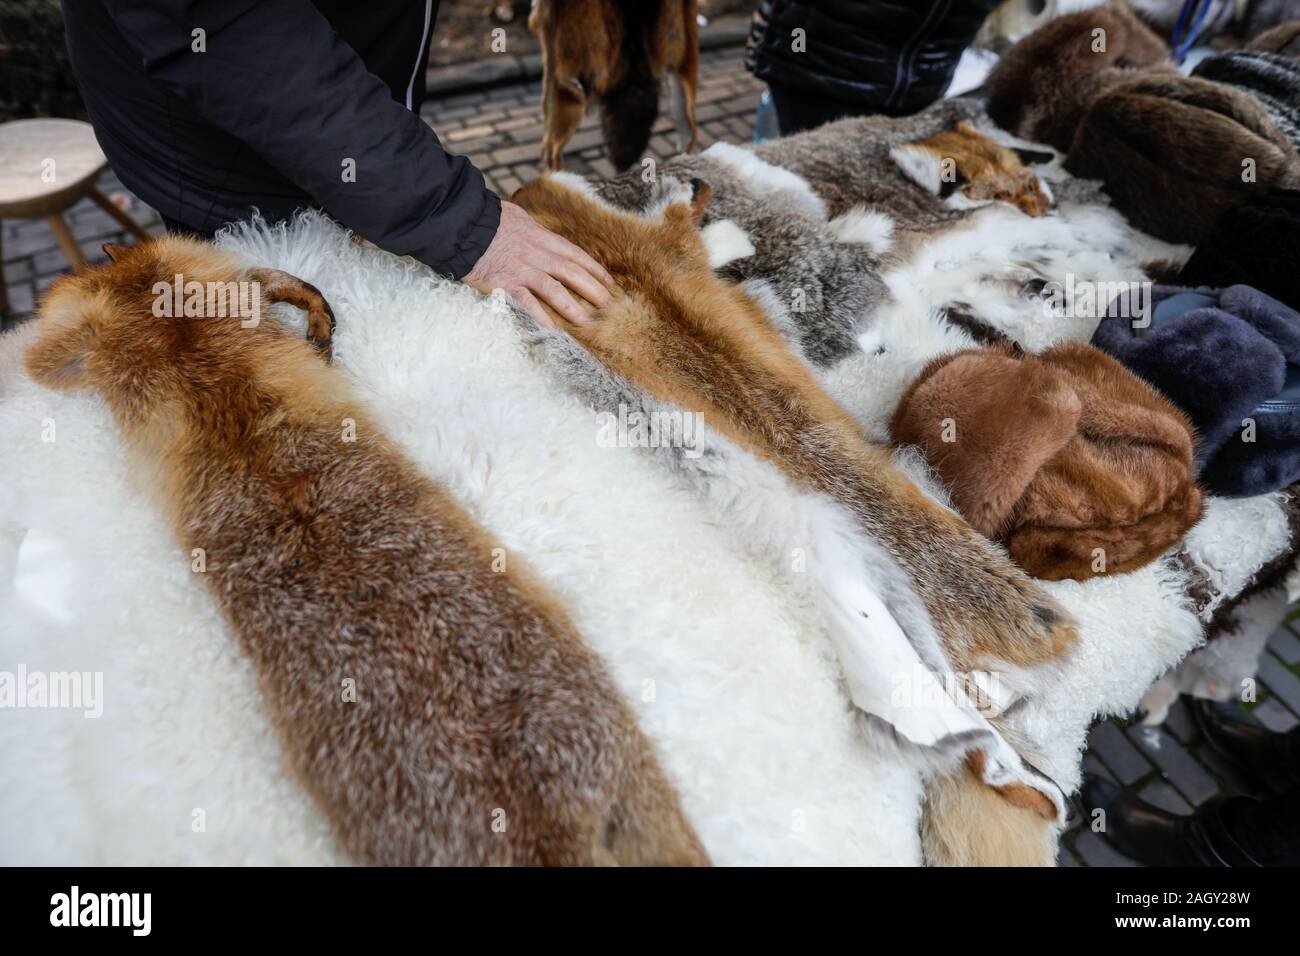 Skinned fox and other animals furs on exhibition at a peasants fair in Bucharest, Romania. Stock Photo